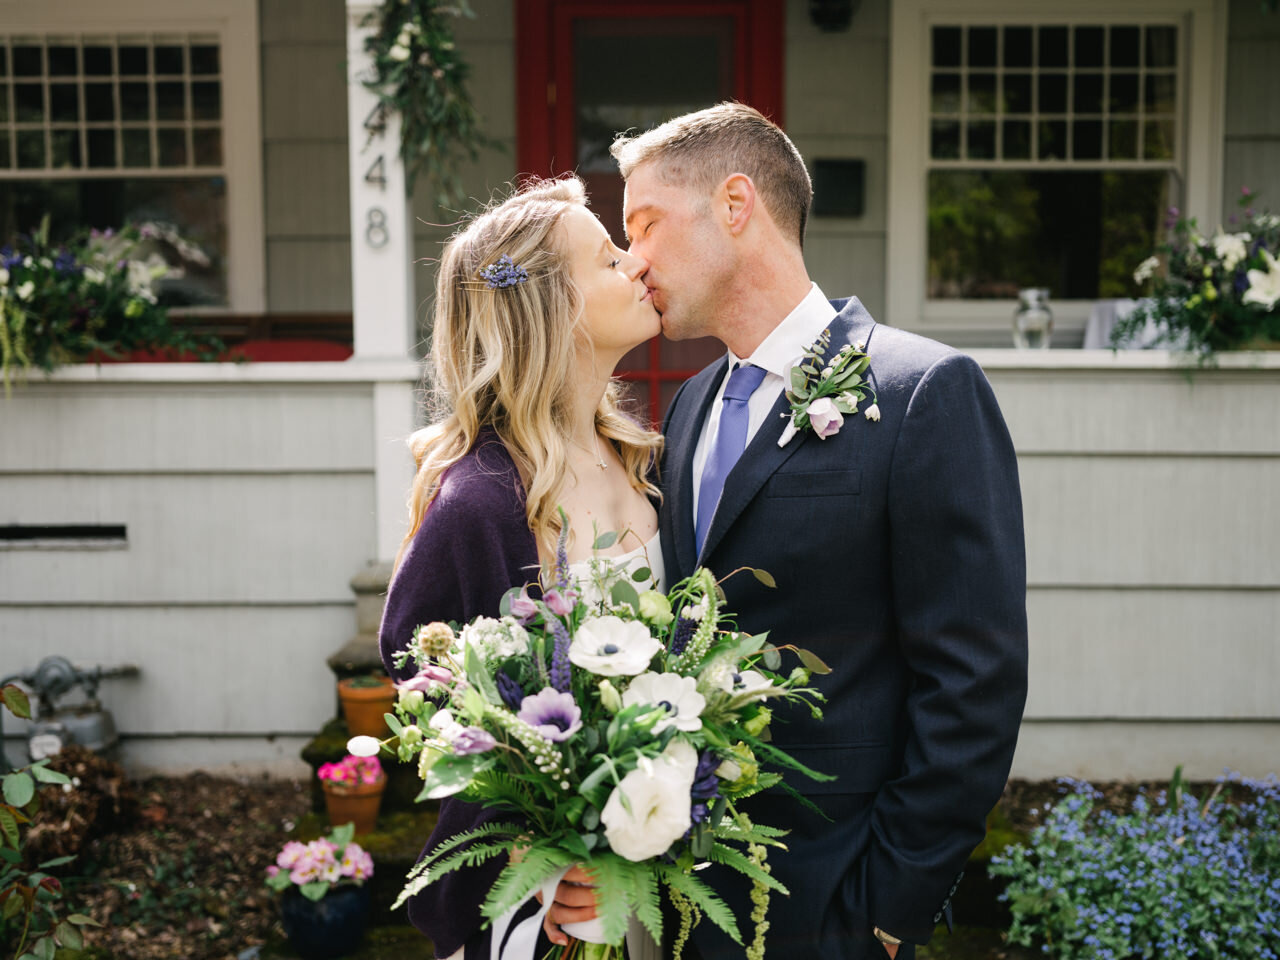  Blonde bride and groom kiss in front of home holding purple, white bouquet with ferns backlit by sunlight 